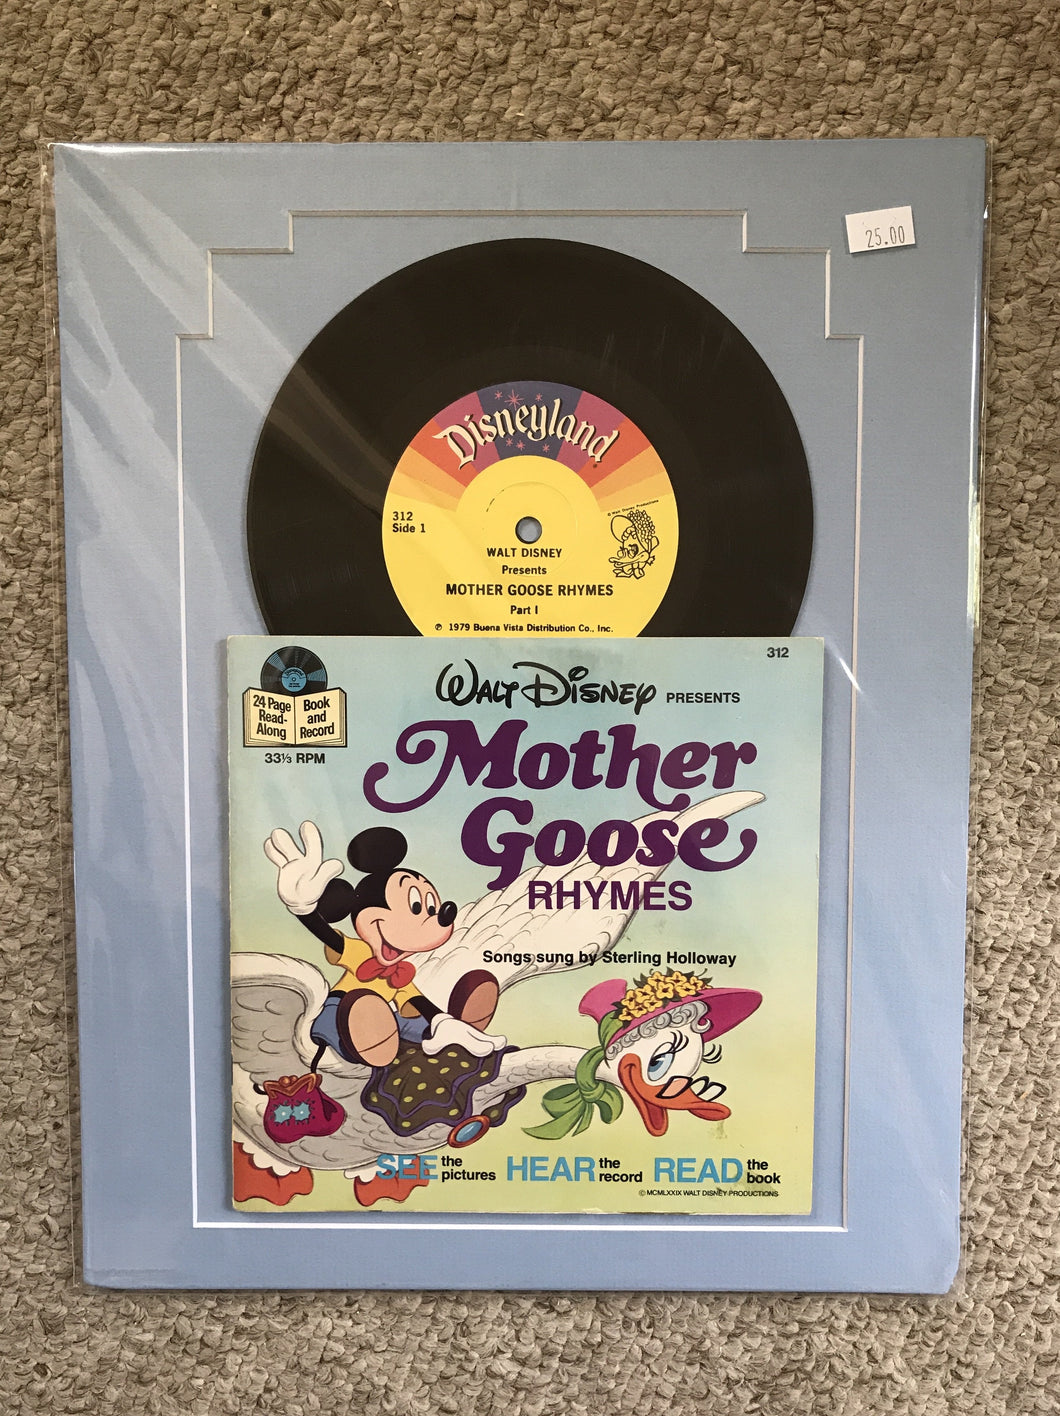 Disney’s Mother Goose vintage book and record